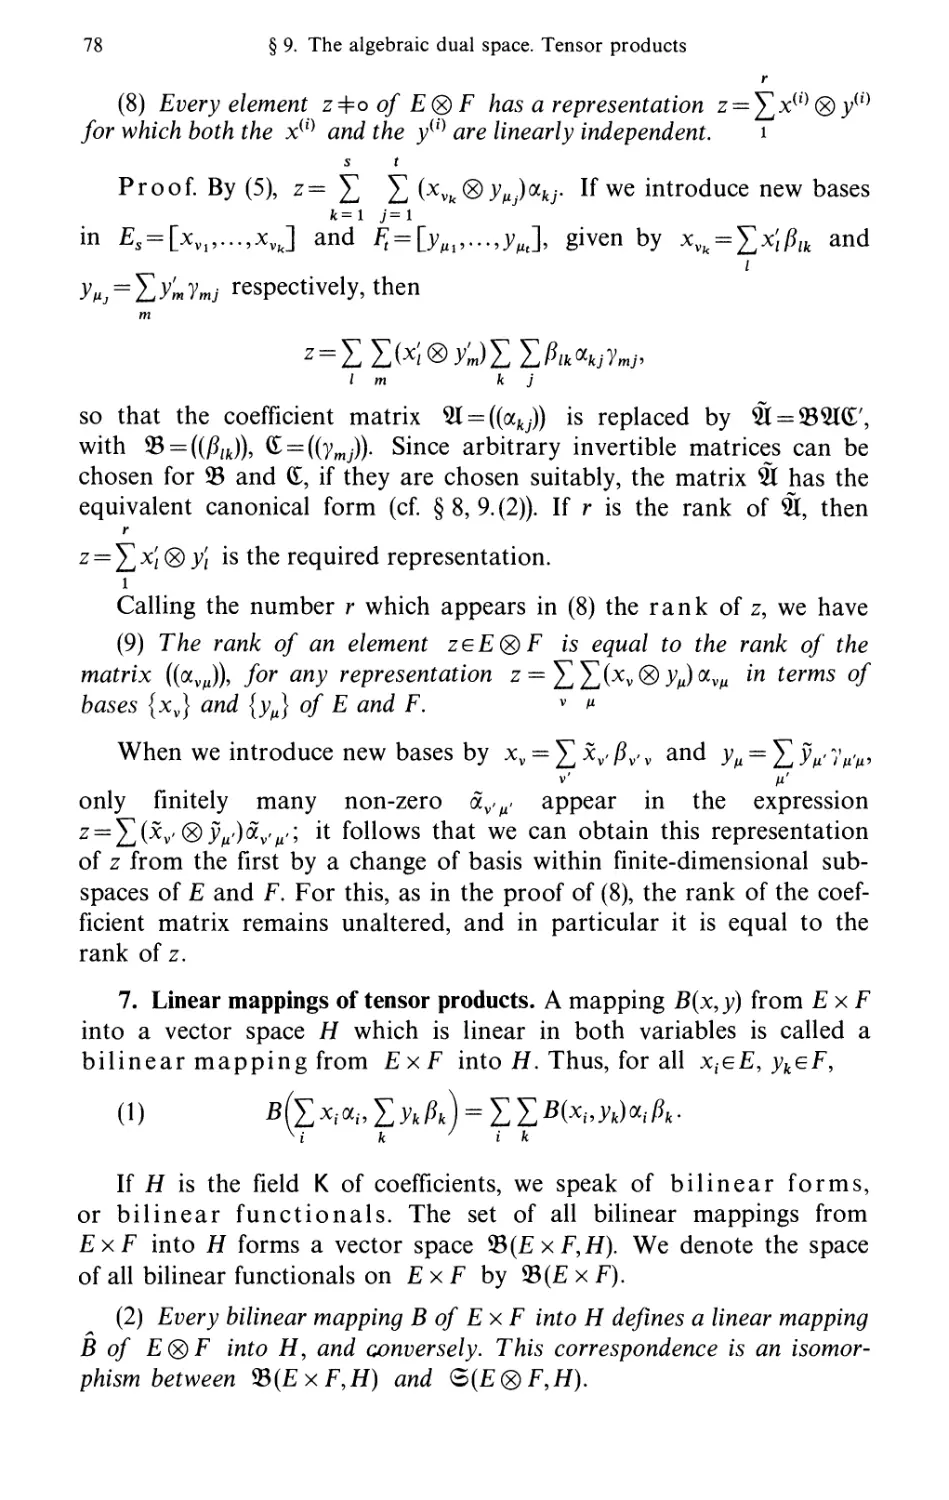 7. Linear mappings of tensor products